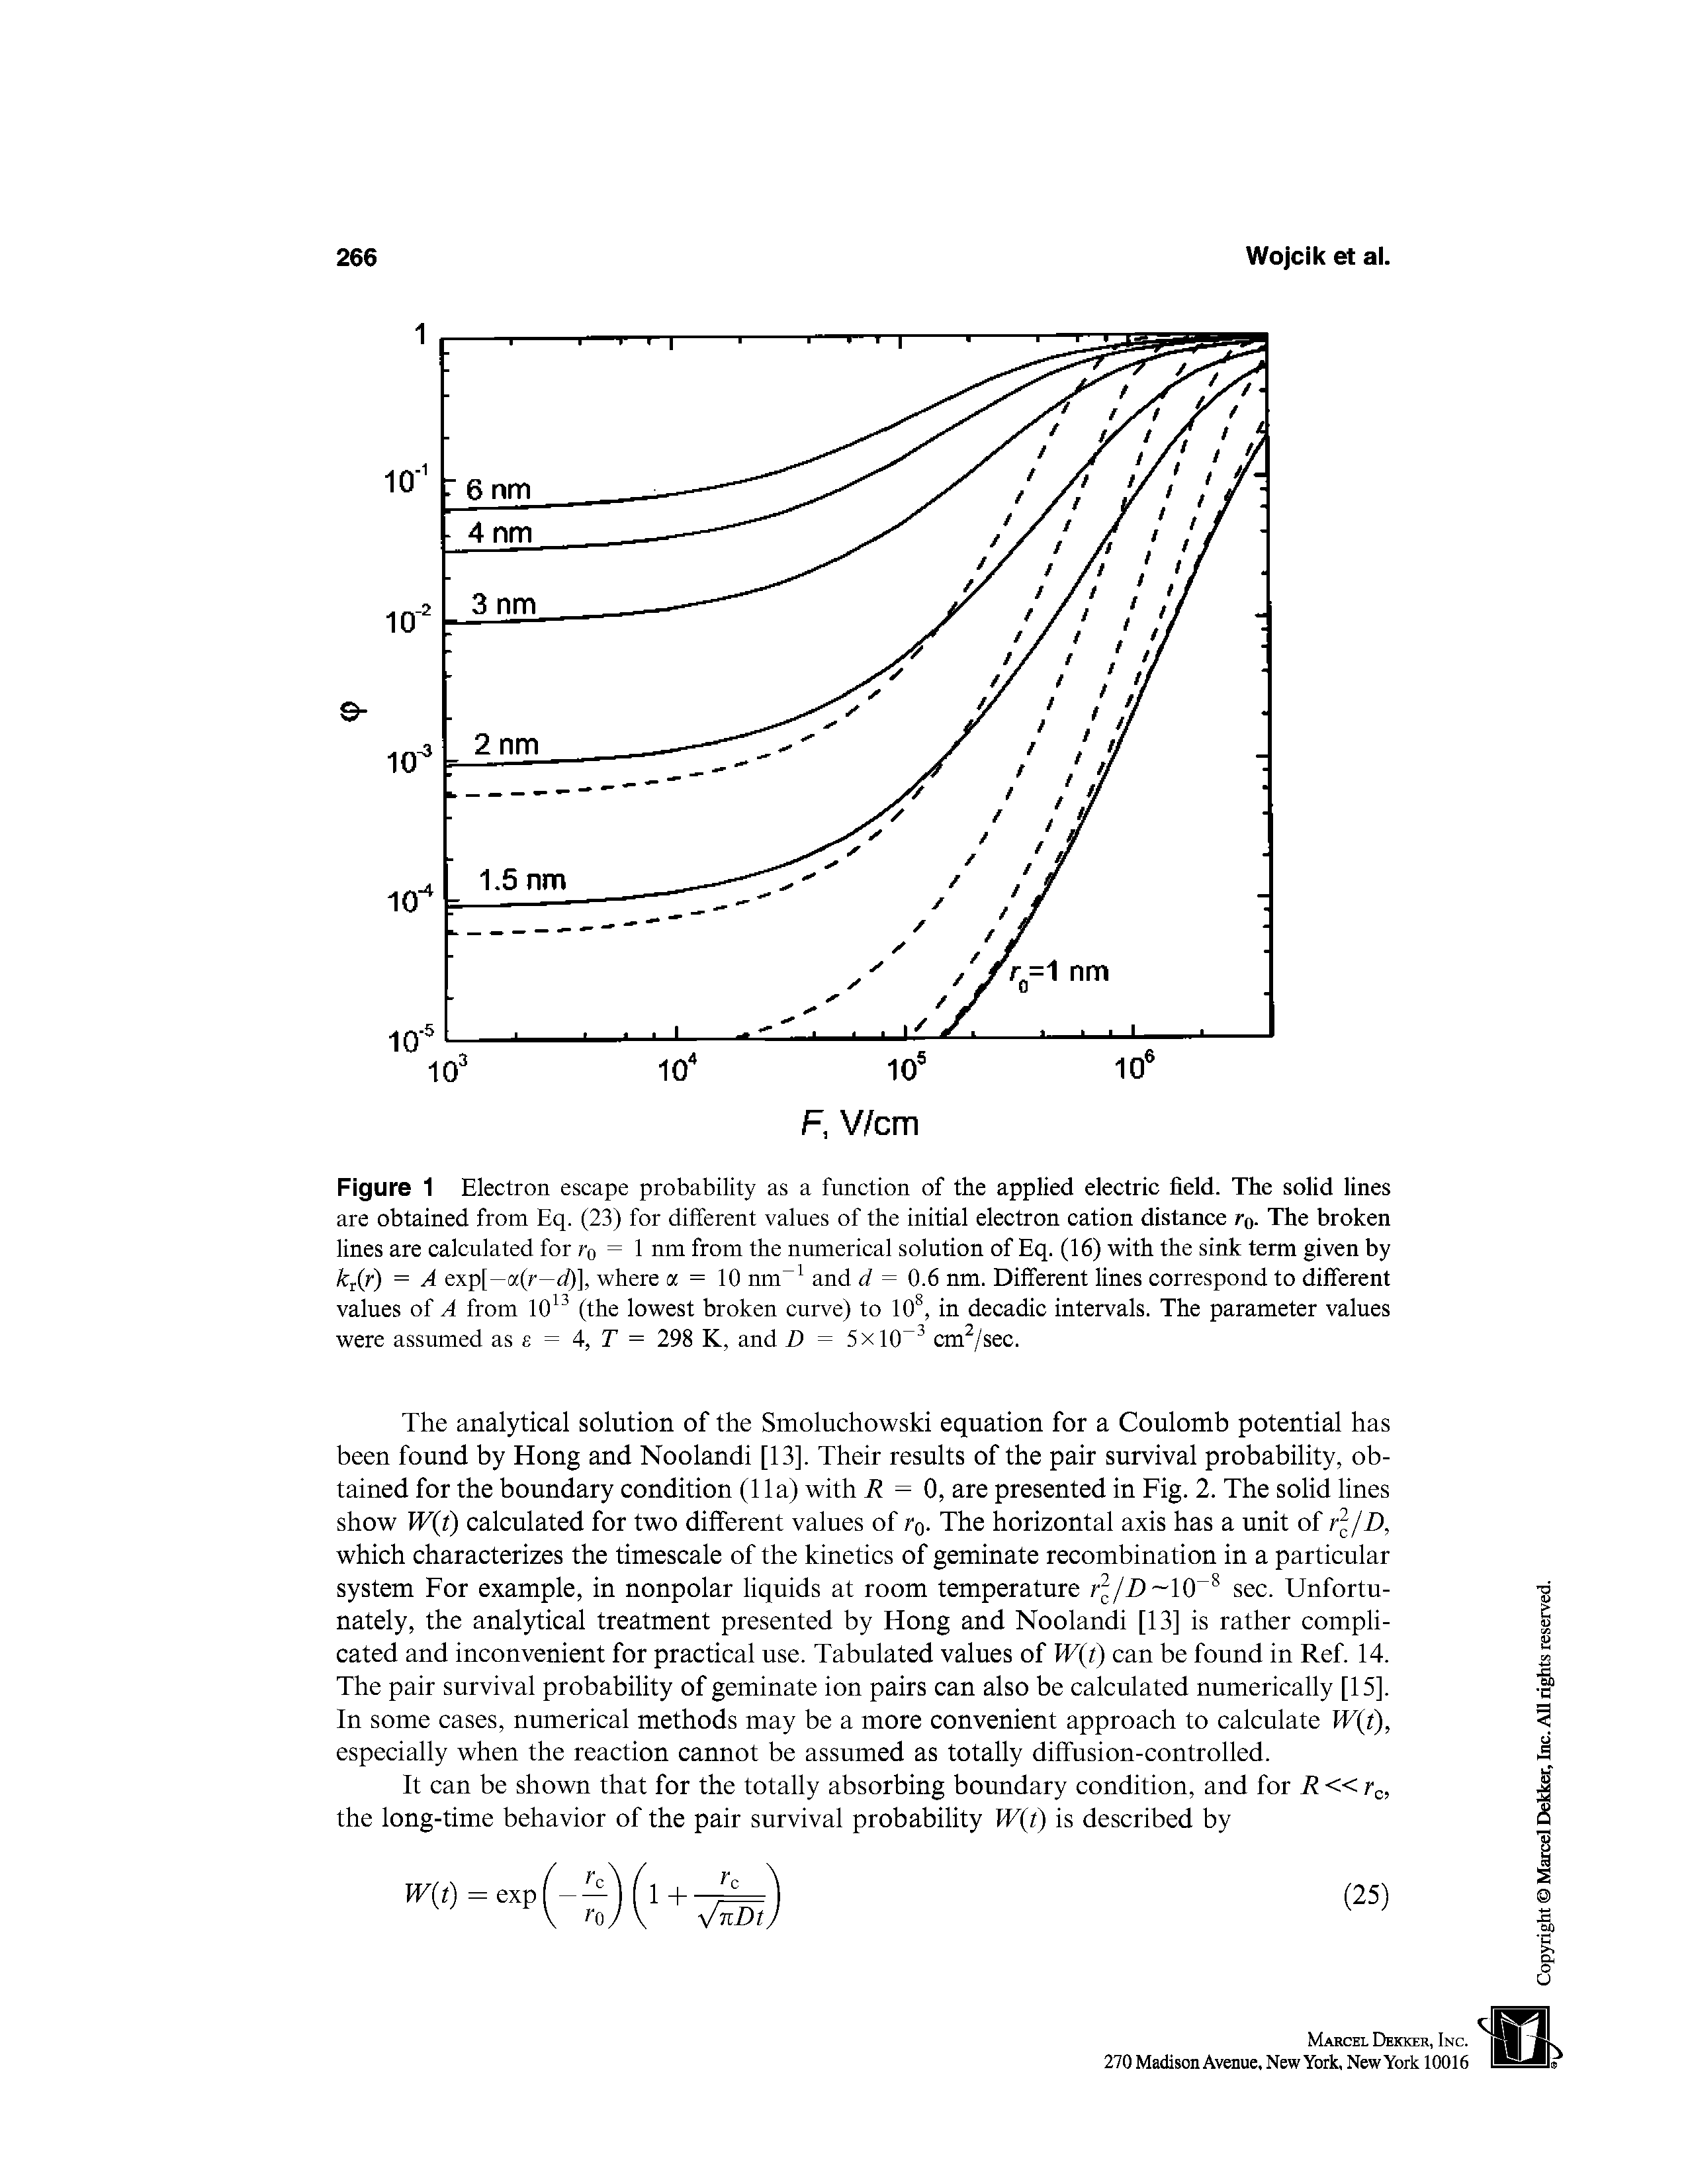 Figure 1 Electron escape probability as a function of the applied electric field. The solid lines are obtained from Eq. (23) for different values of the initial electron cation distance ro- The broken lines are calculated for ro = 1 nm from the numerical solution of Eq. (16) with the sink term given by k r) = A exp[—a(r—<i)], where a = 10 nm and d = 0.6 nm. Different lines correspond to different values of A from 10 (the lowest broken curve) to 10, in decadic intervals. The parameter values were assumed as = 4, T = 298 K, and D = 5x10 cm /sec.